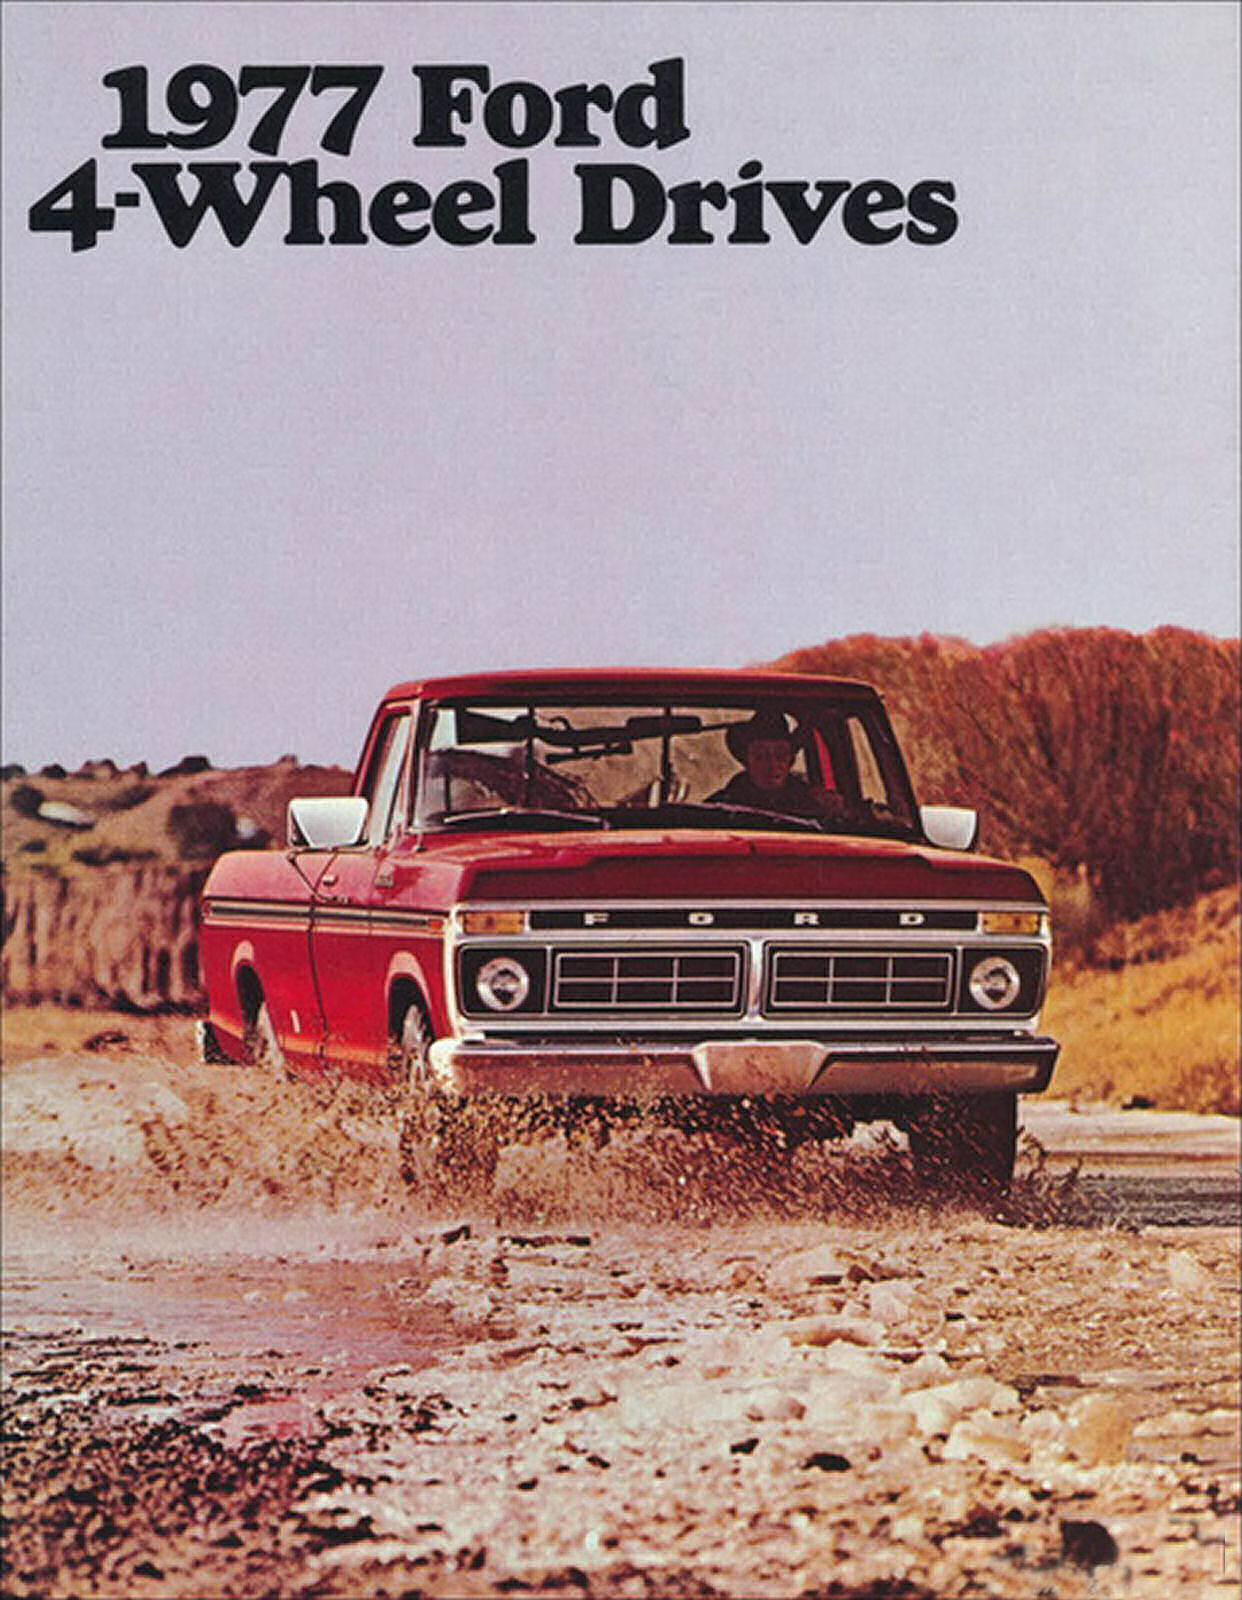 1977 Ford 4-Wheel Drives-01